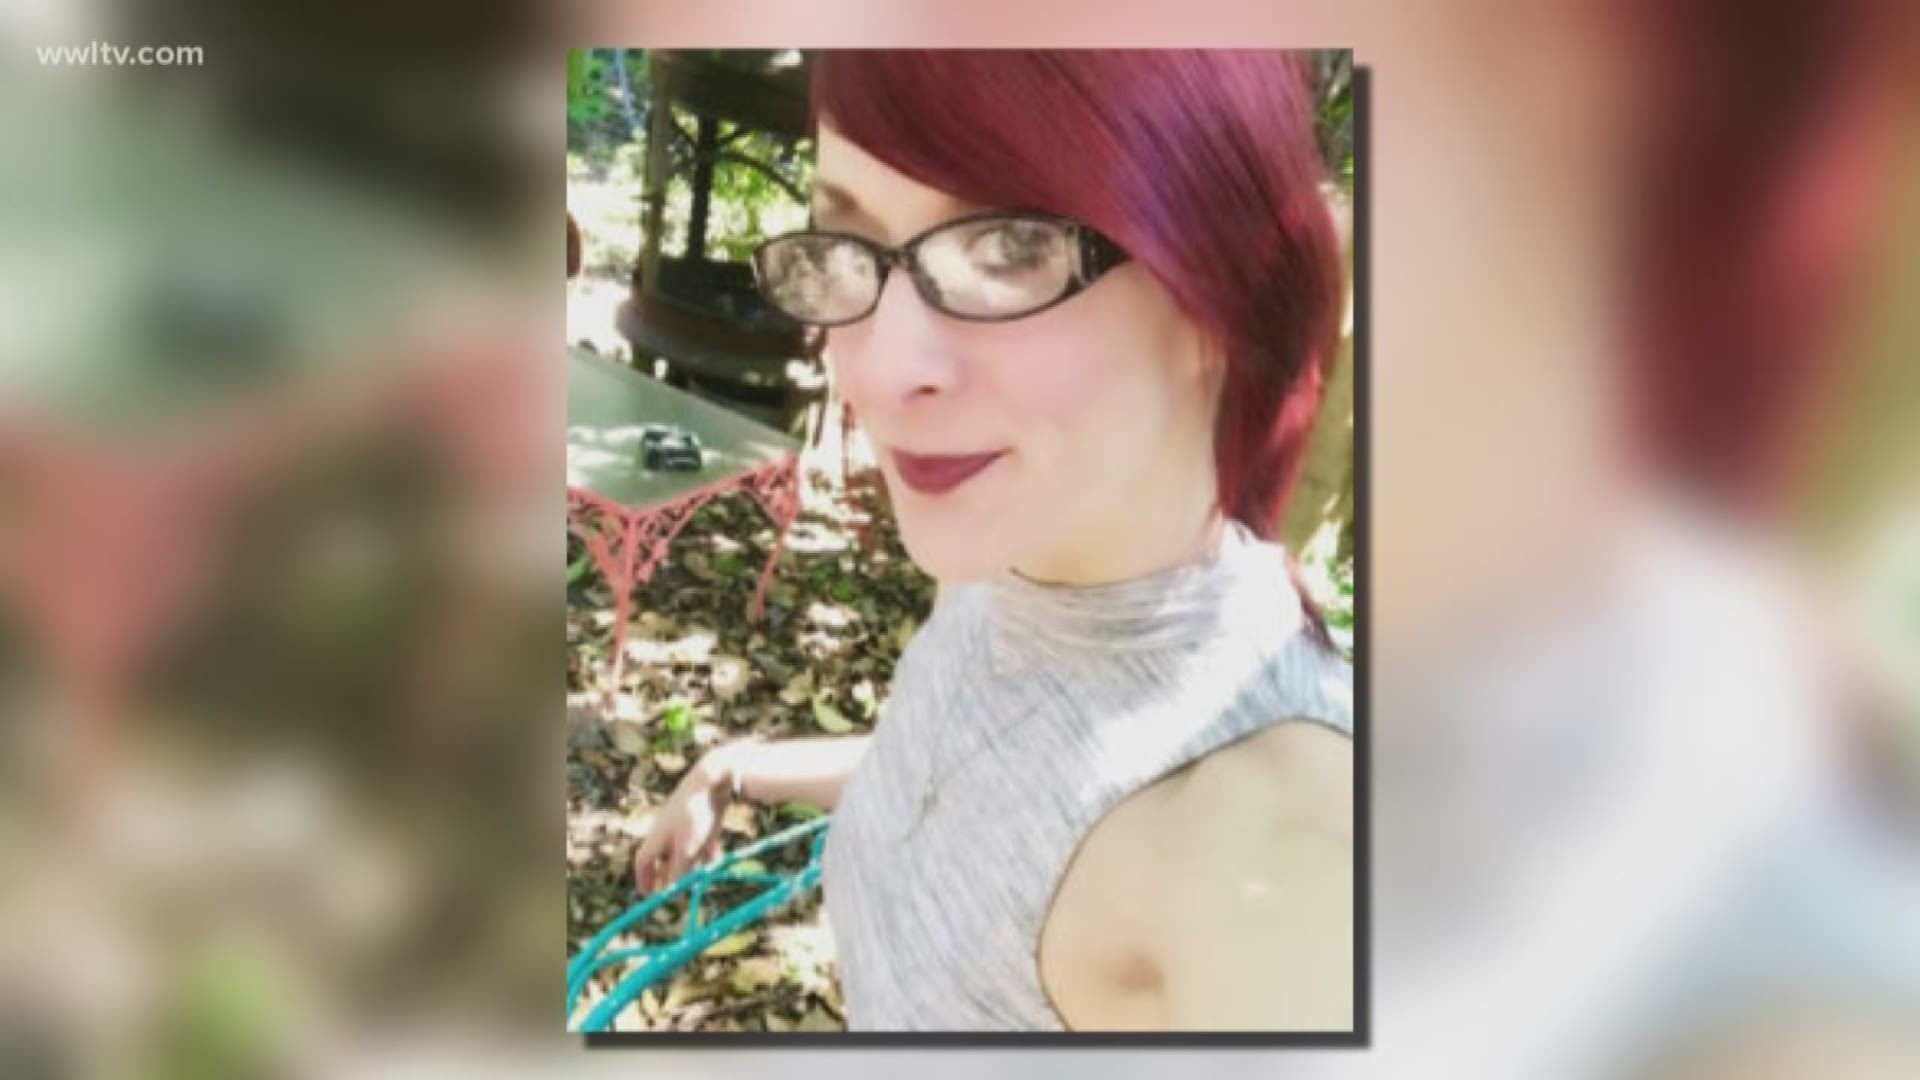 43-year-old Mia West had been missing since Oct. 7. Her car and later her body was found in Lafourche Parish Saturday afternoon. 